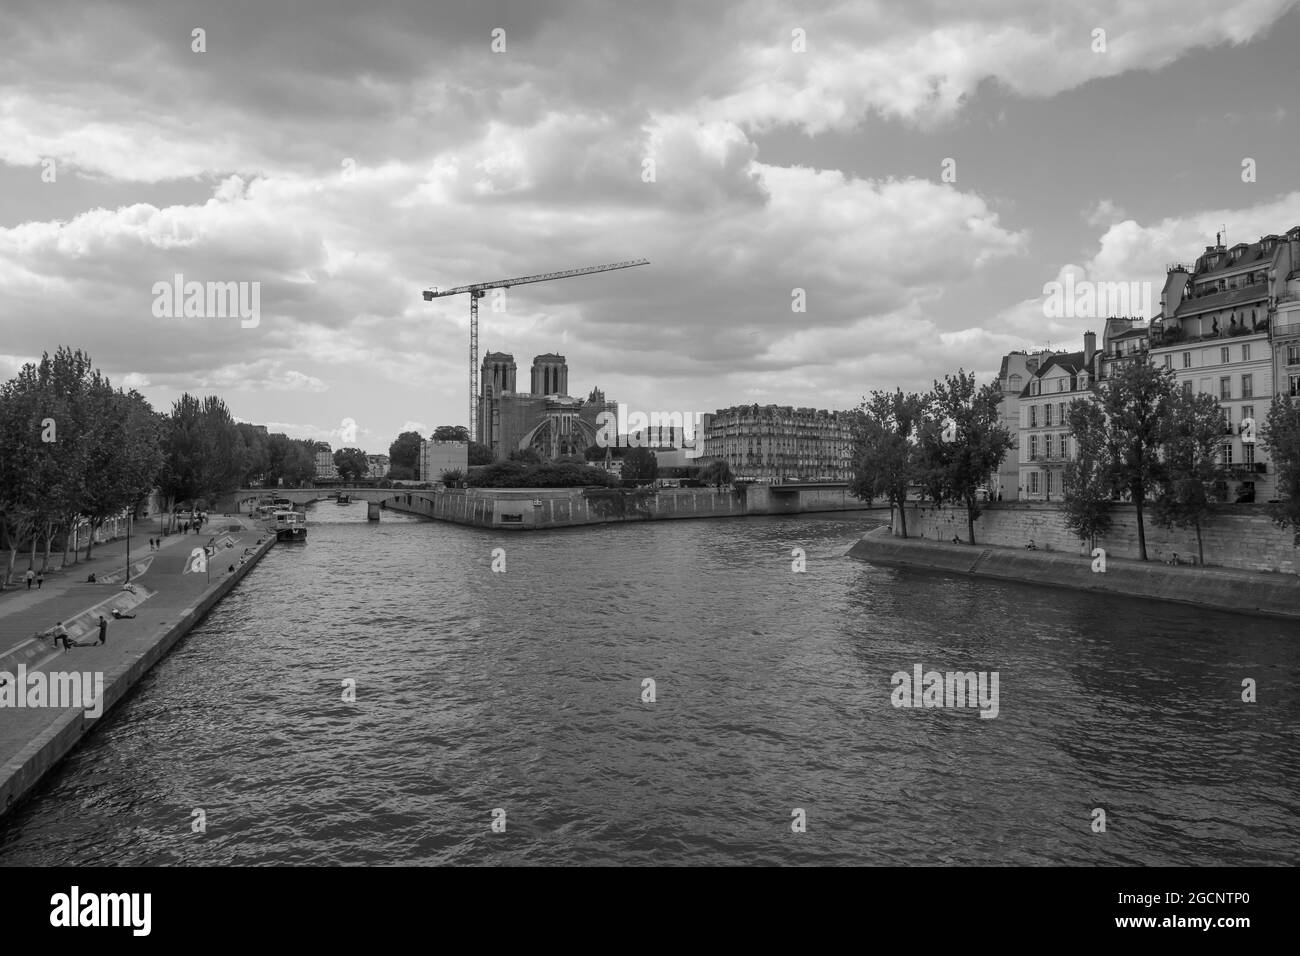 View From Seine River Of Restoration Of Notre-Dame de Paris Cathedral Stock Photo